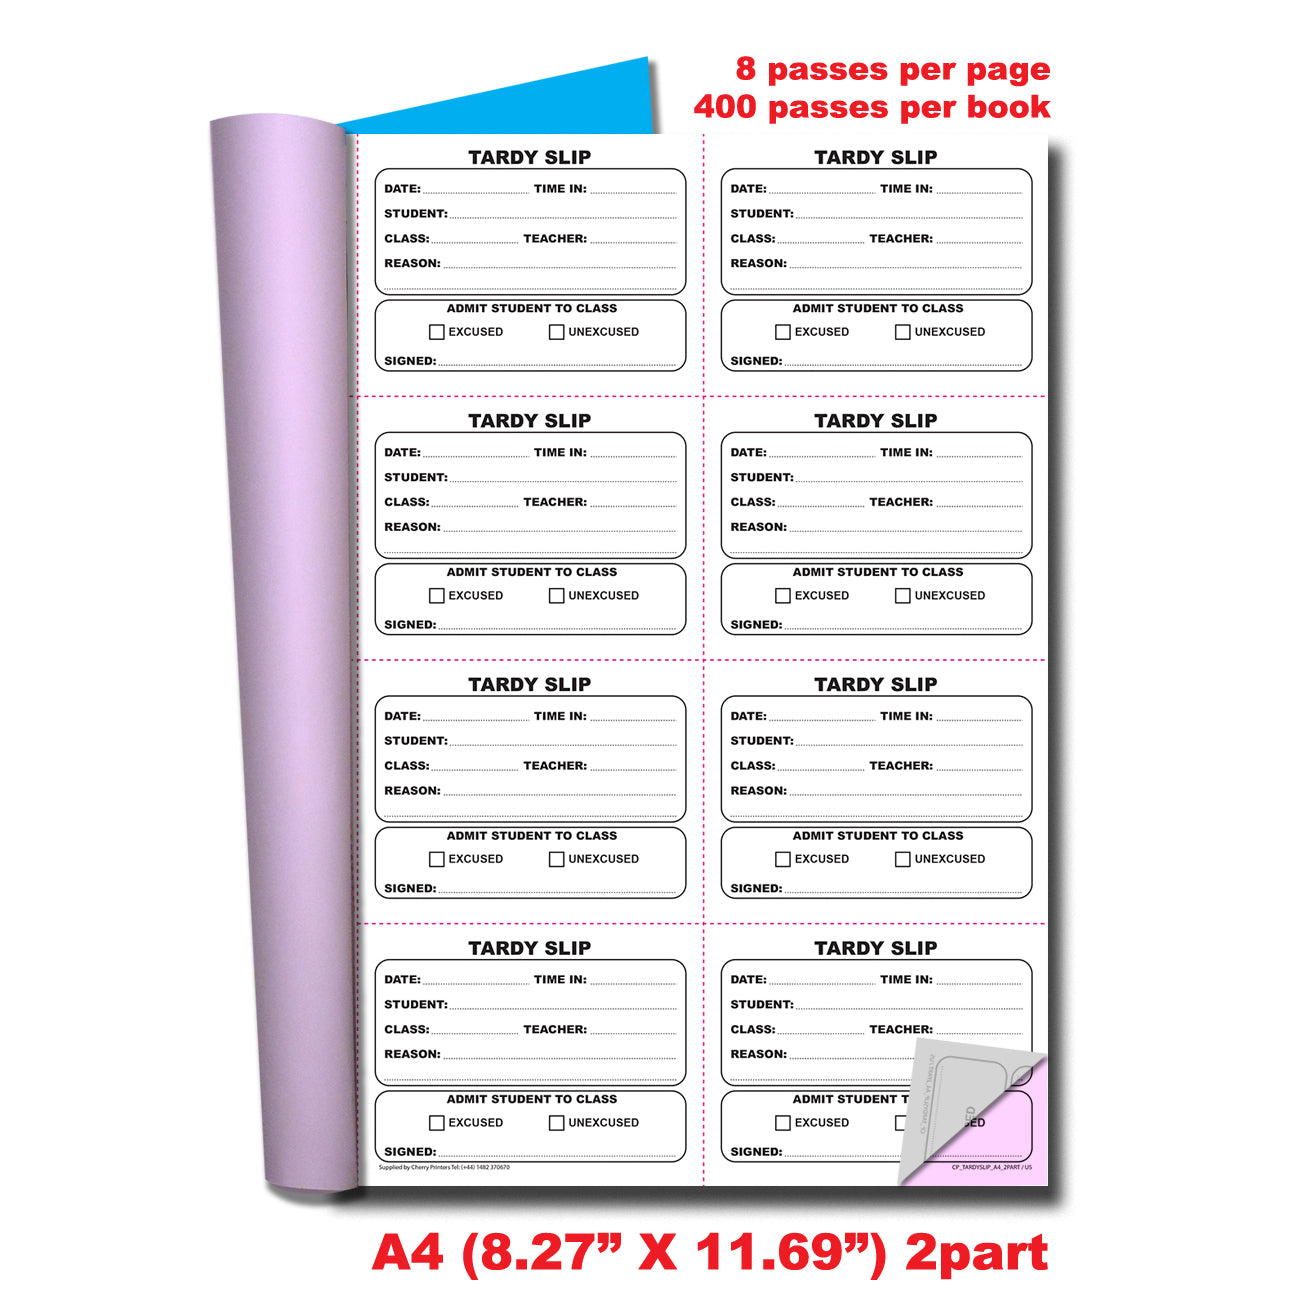 Tardy Slip | Fold and Tear | Duplicate Book | 2 part | Carbonless | 400 slips Per Book | A4 - 8.27" x 11.69" | BOX OF 20 BOOKS